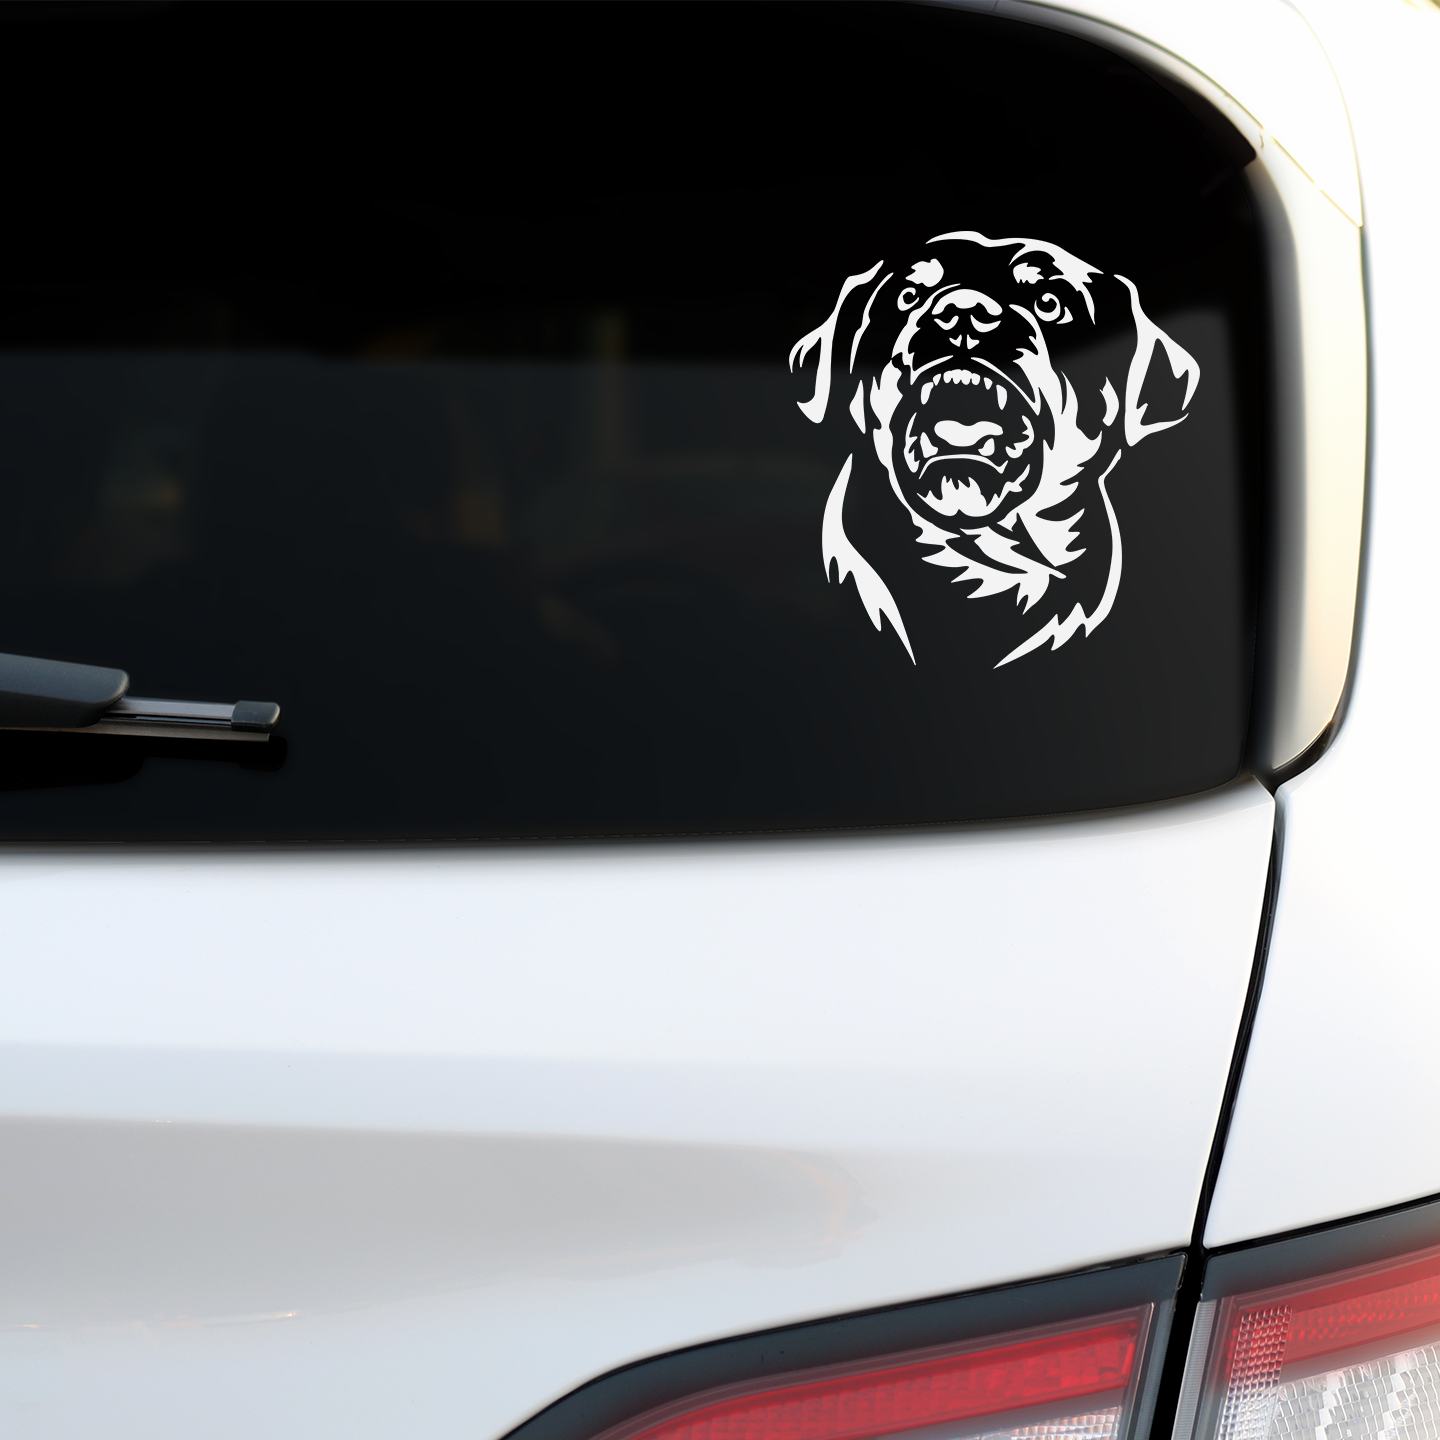 Angry Rottweiler Sticker